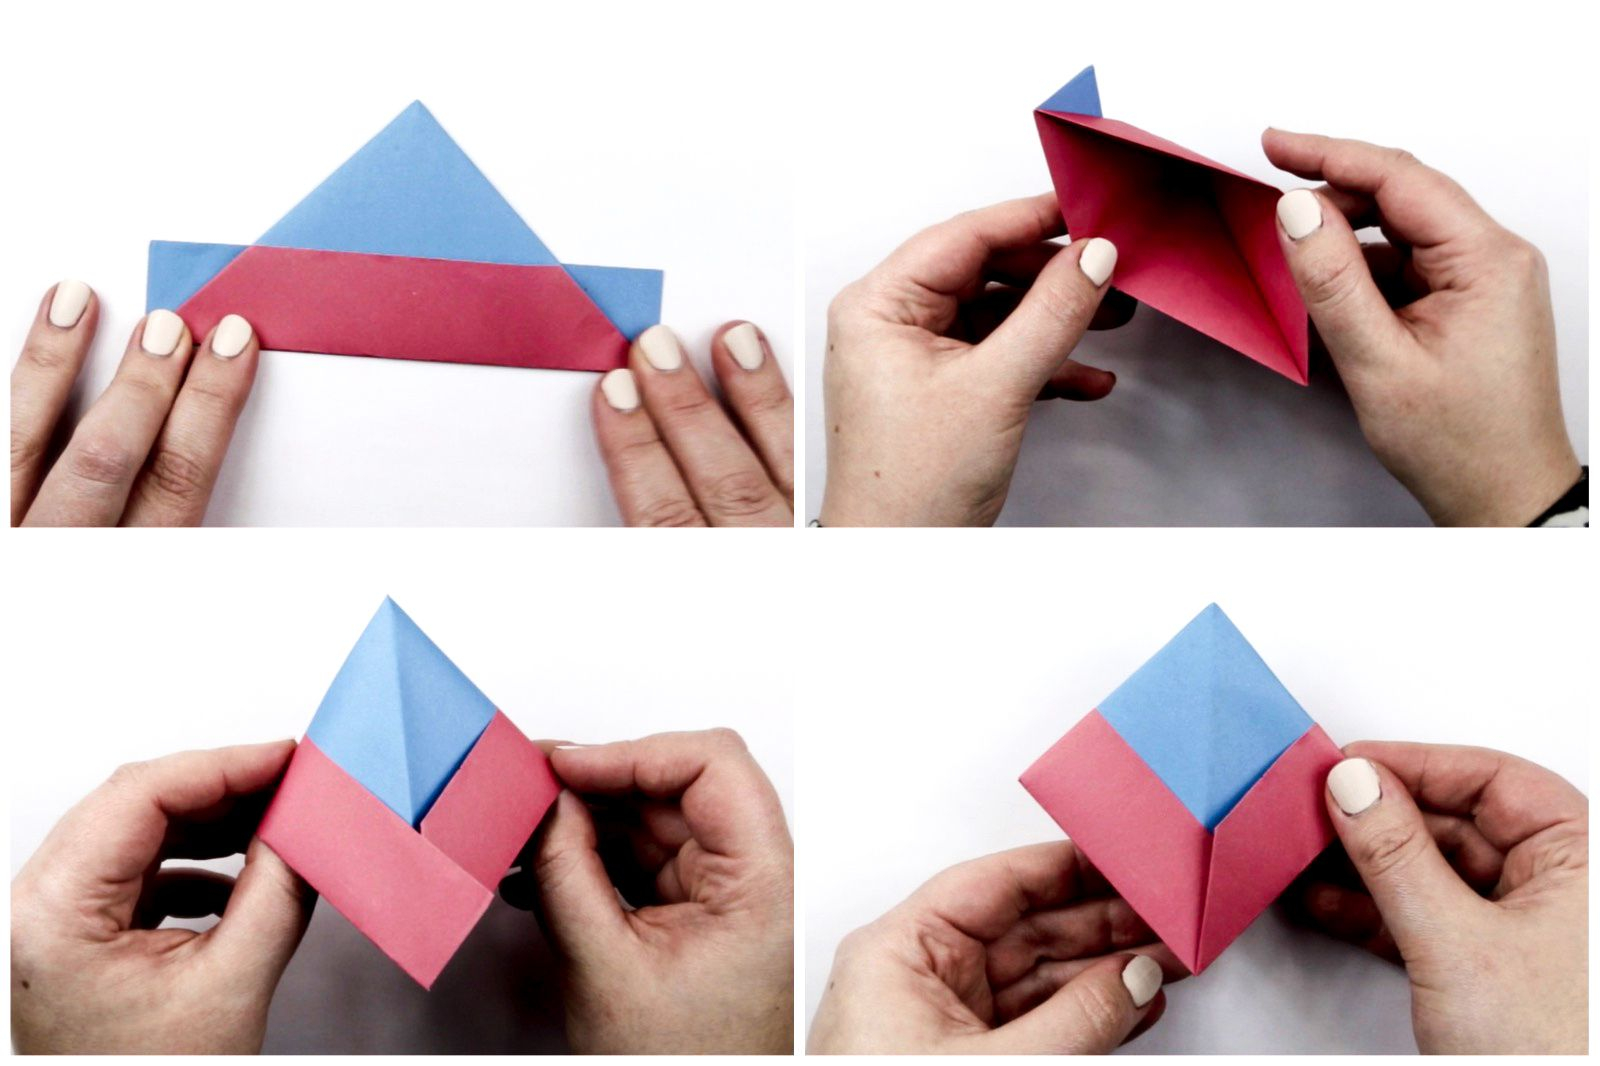 How To Make An Origami Boat Step By Step How To Make An Easy Origami Boat